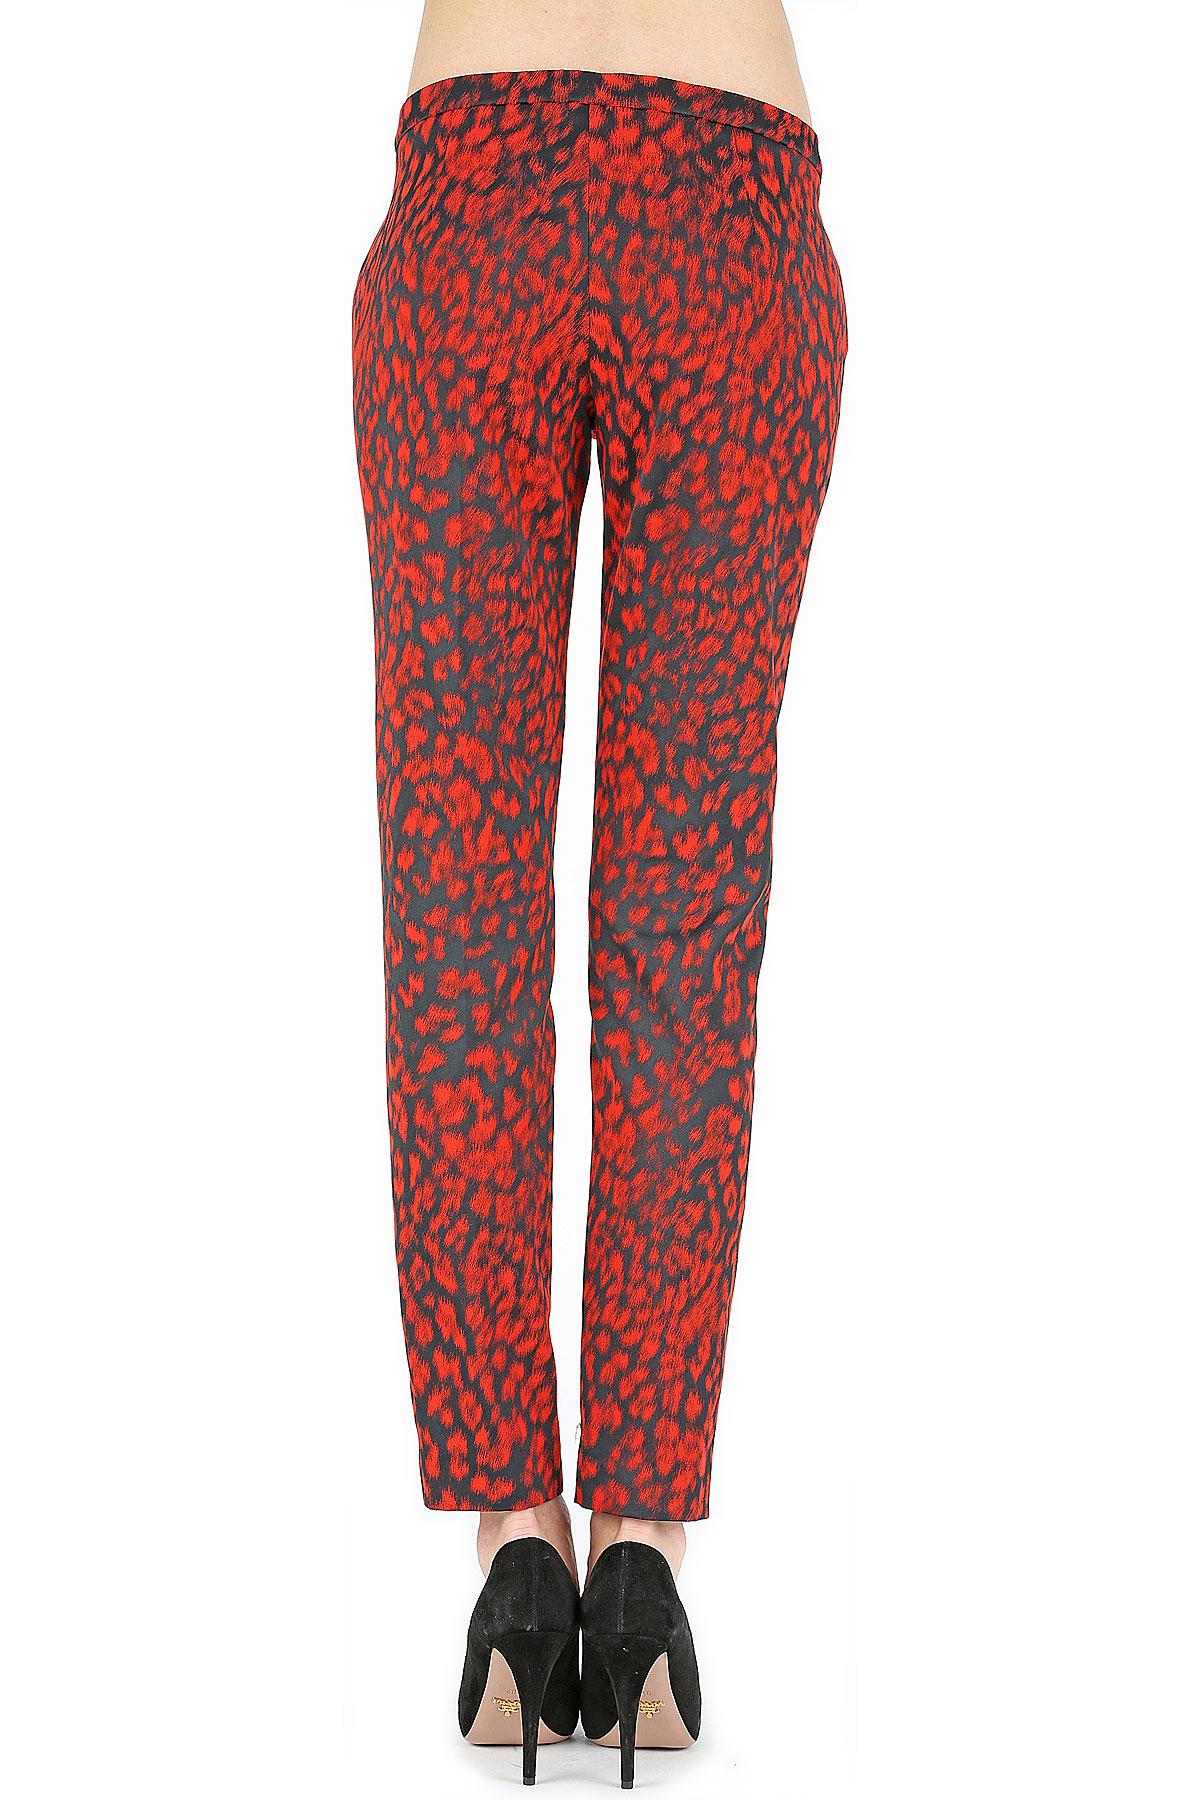 Lyst - Versace Pants For Women On Sale in Red